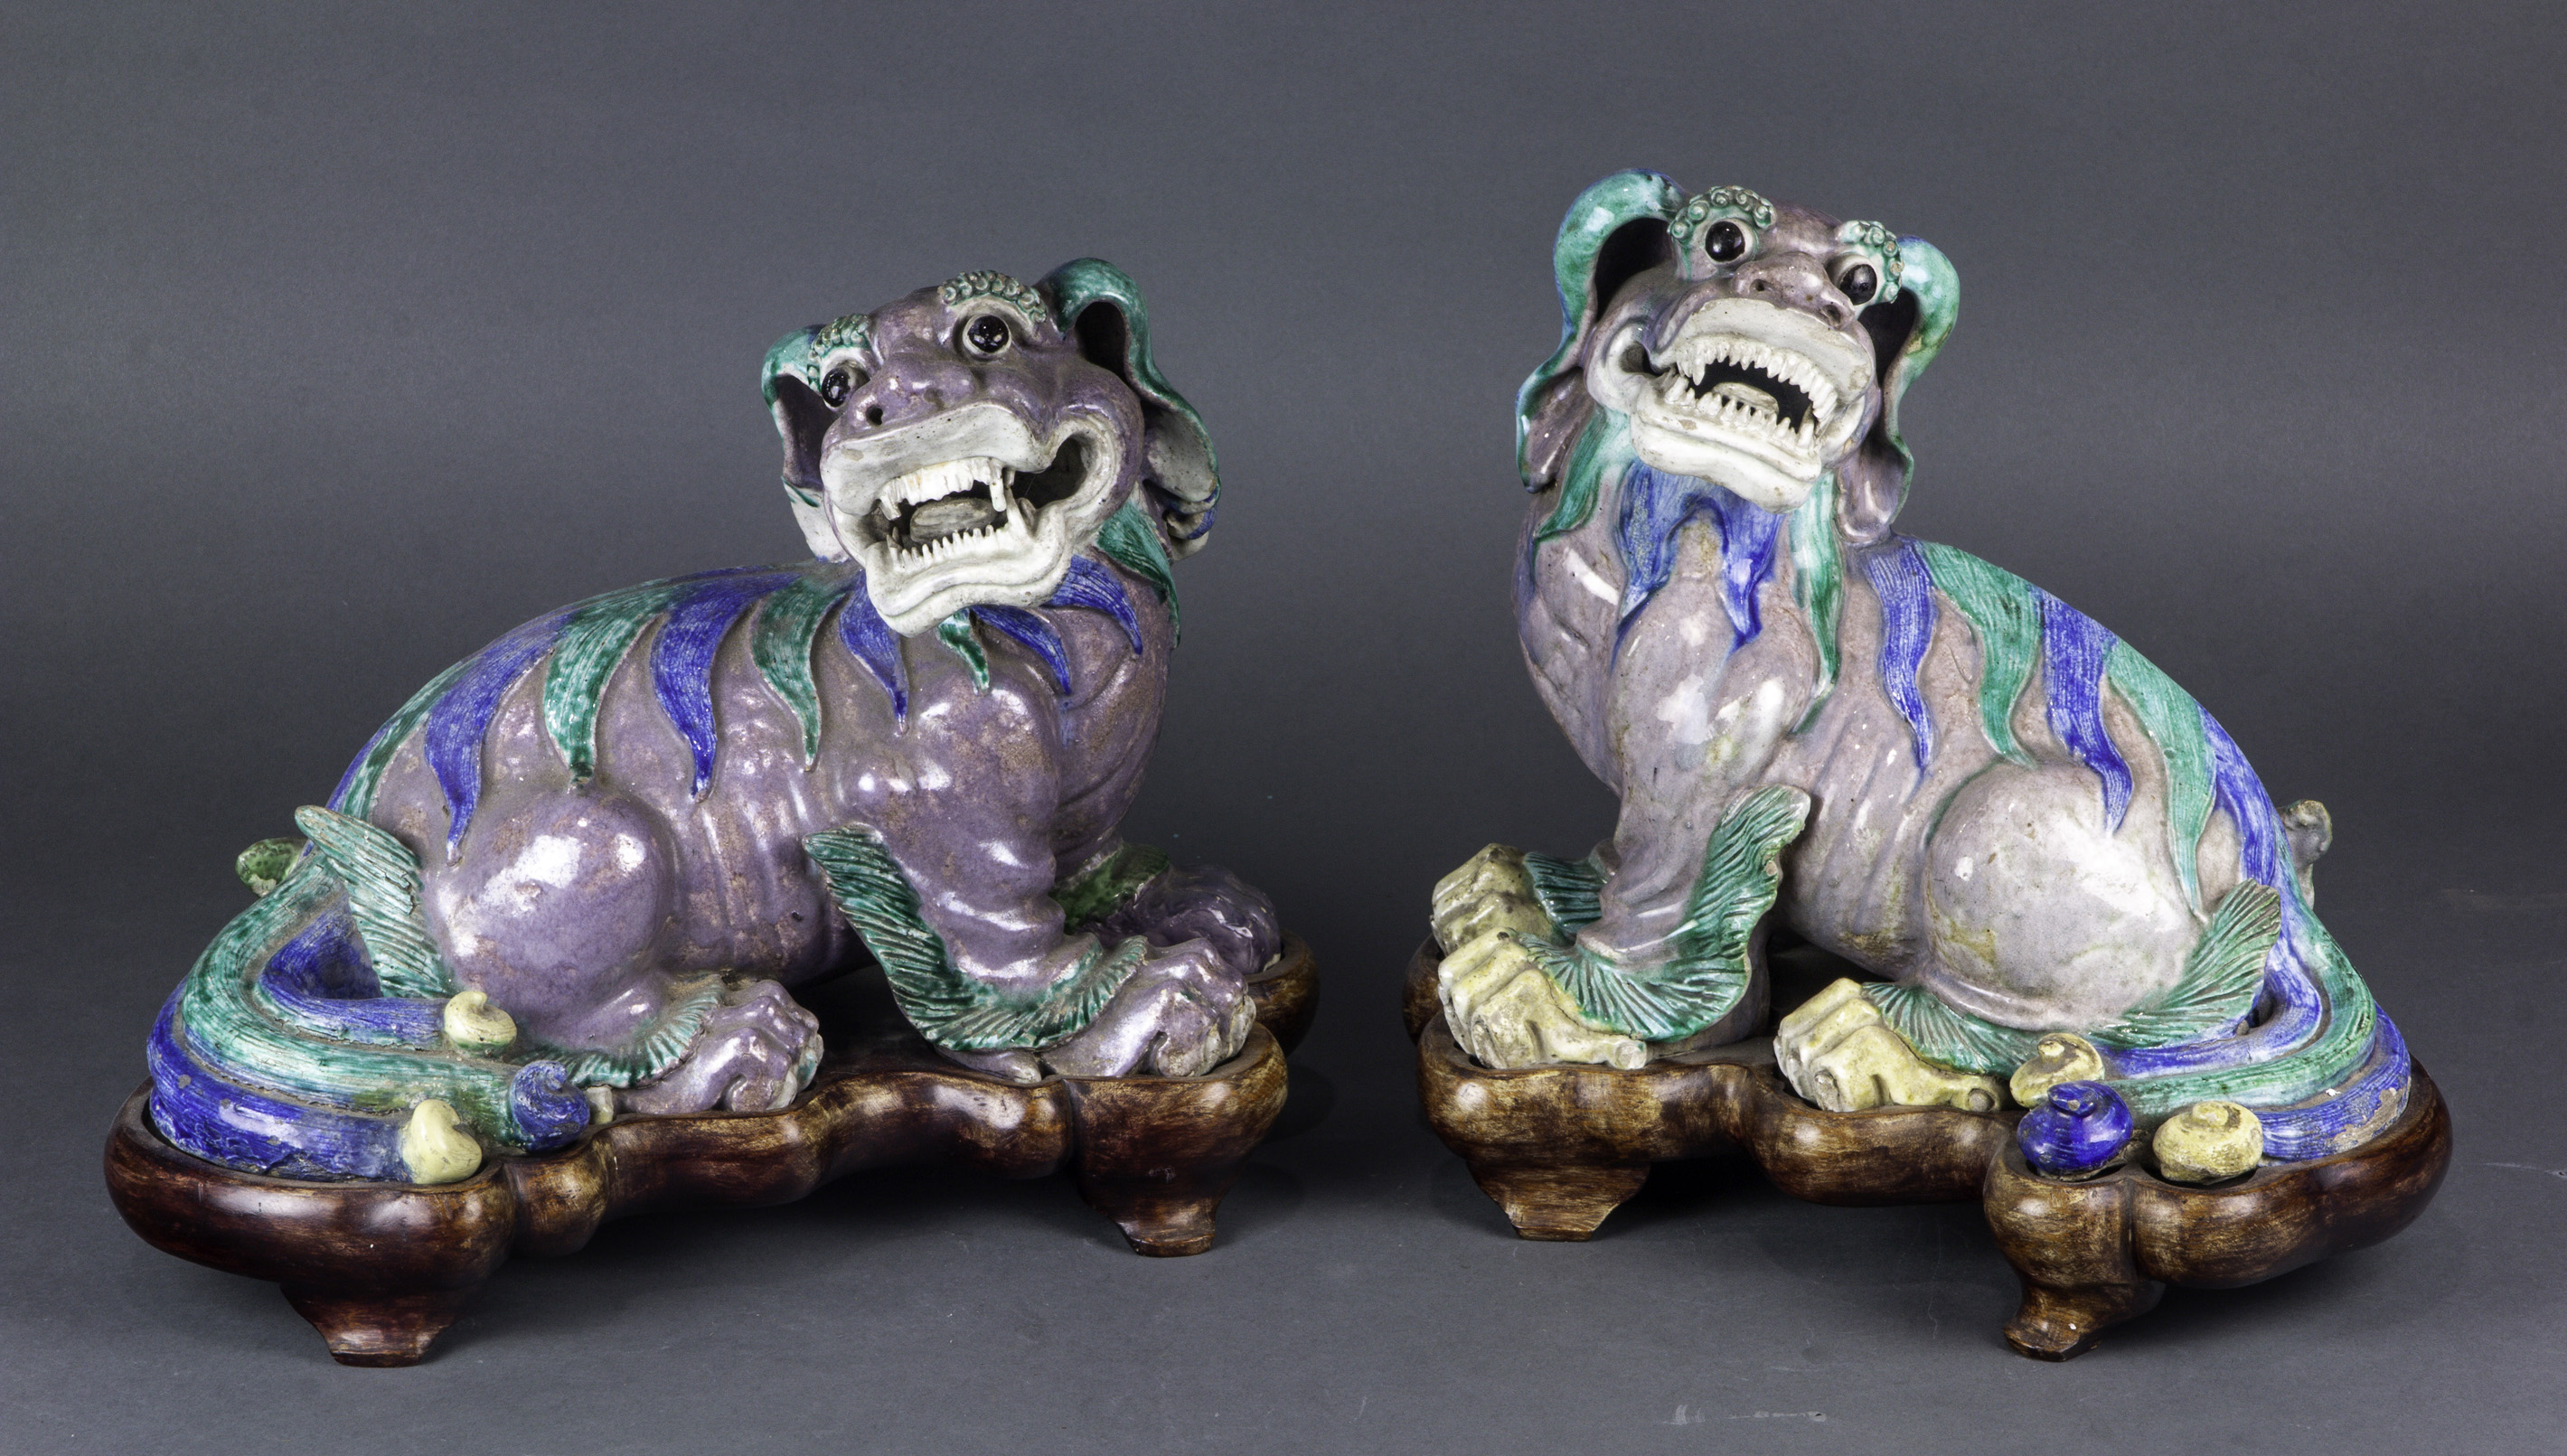 PAIR OF CHINESE CERAMIC FU DOGS 3a497d